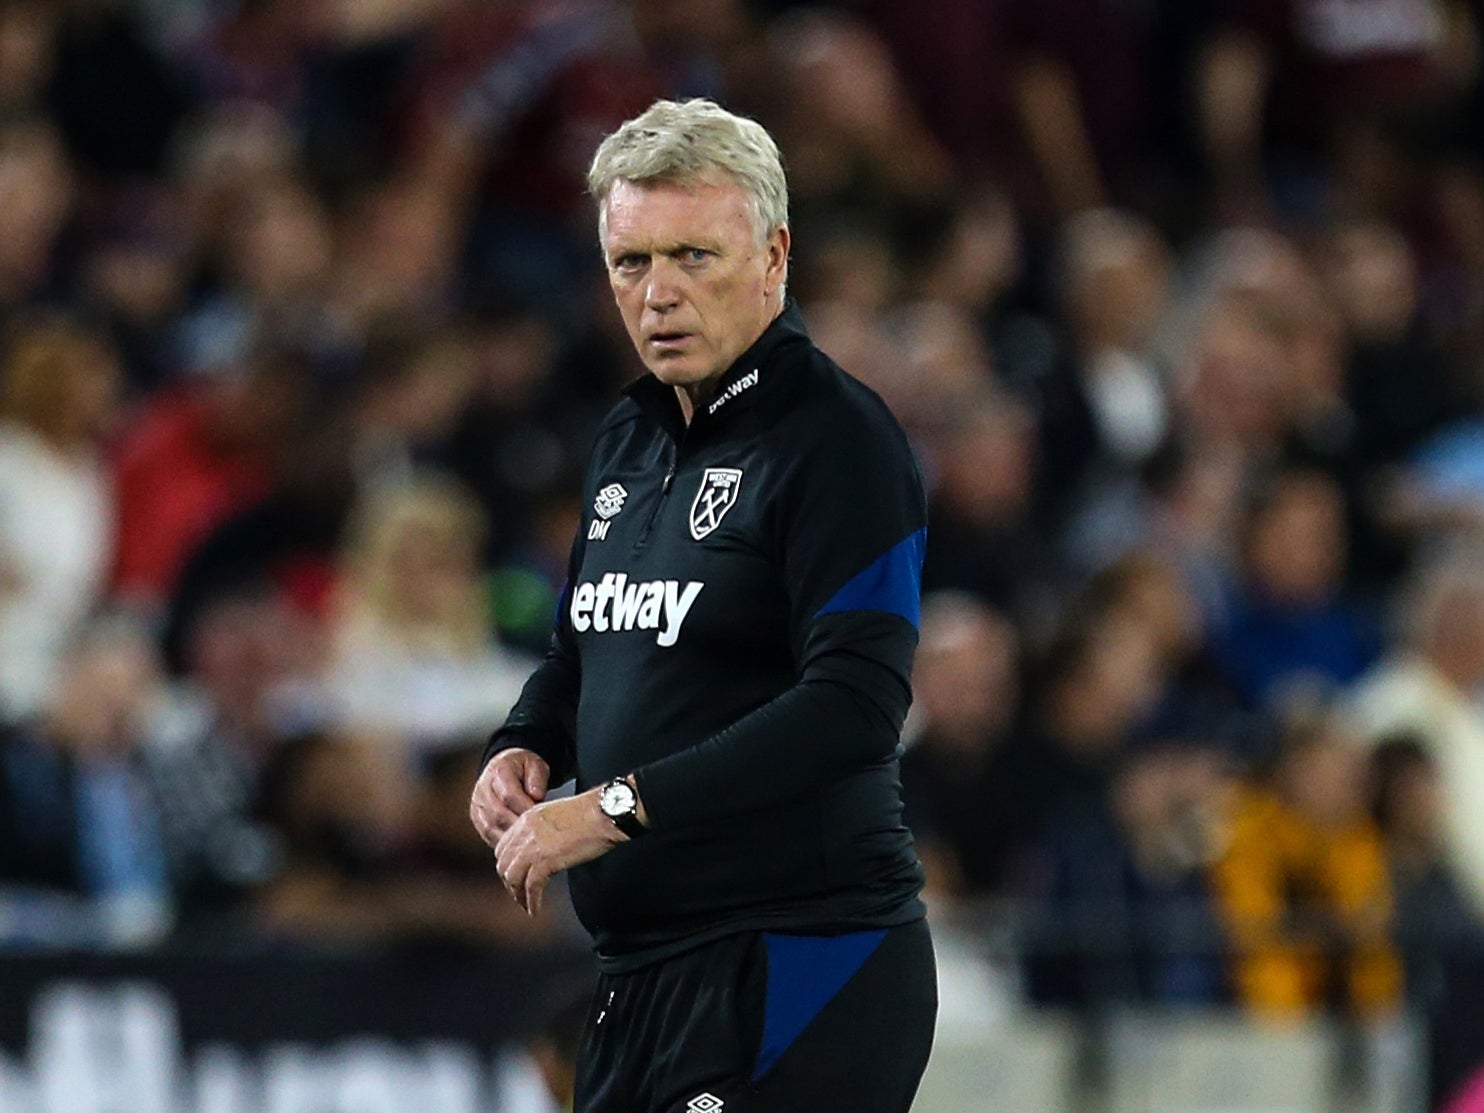 West Ham manager David Moyes saw in-form striker Michail Antonio sent off late on (Steven Paston/PA)